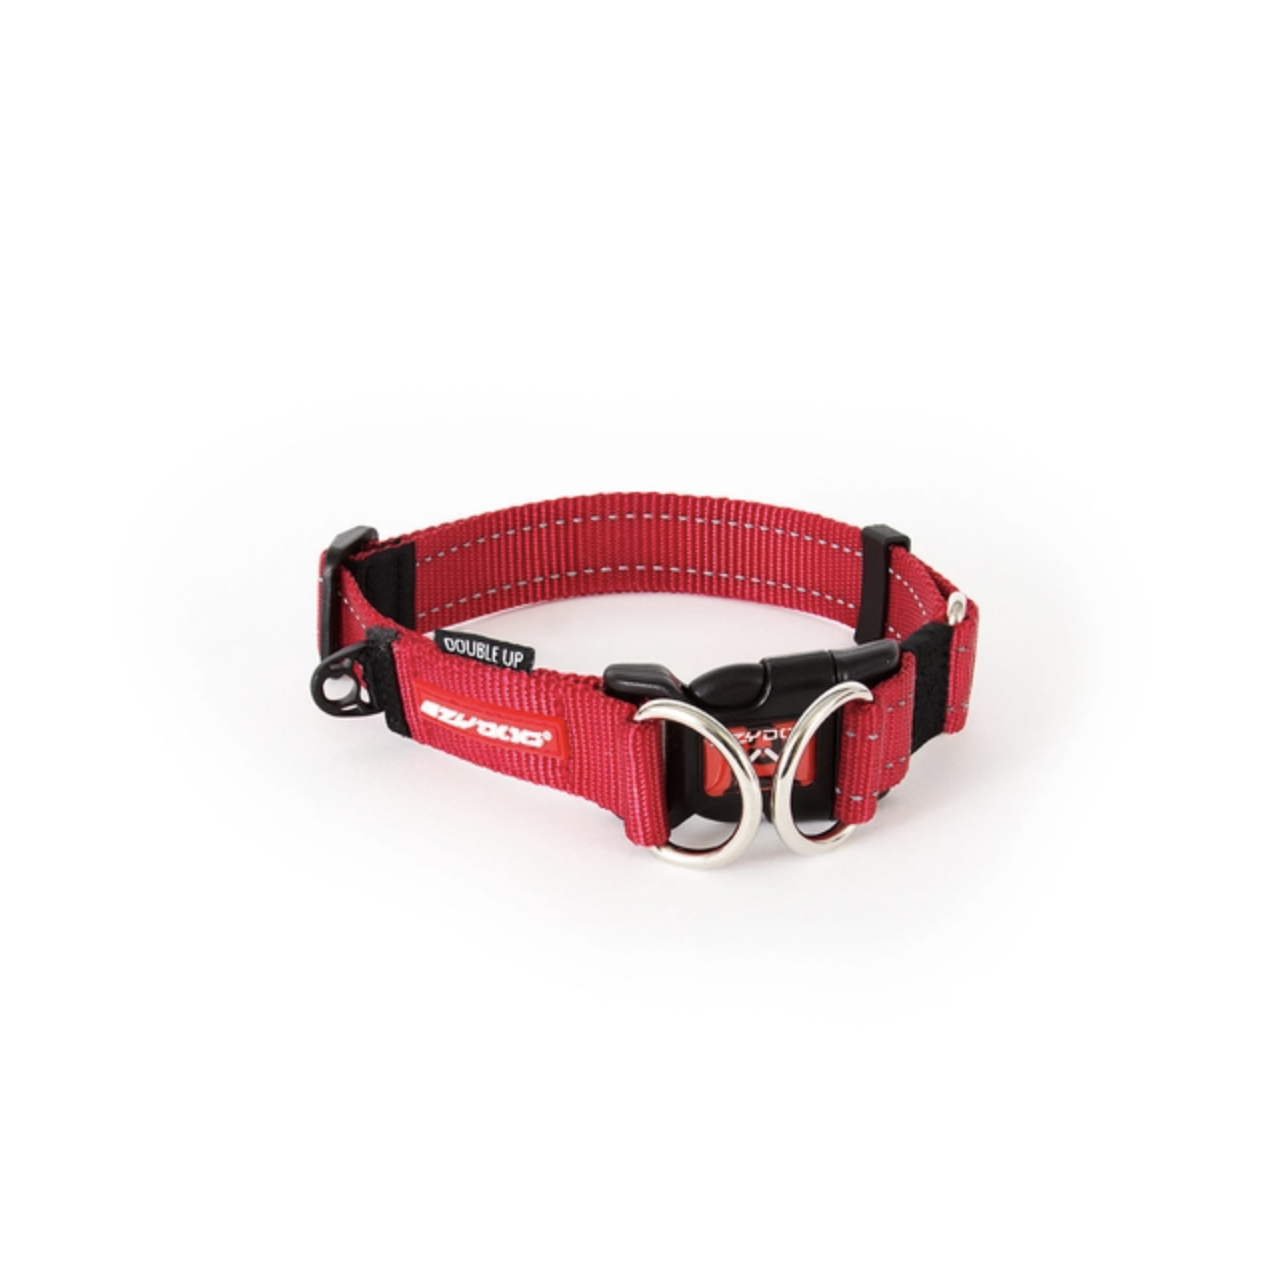 EzyDog Double Up Collar - Red LARGE